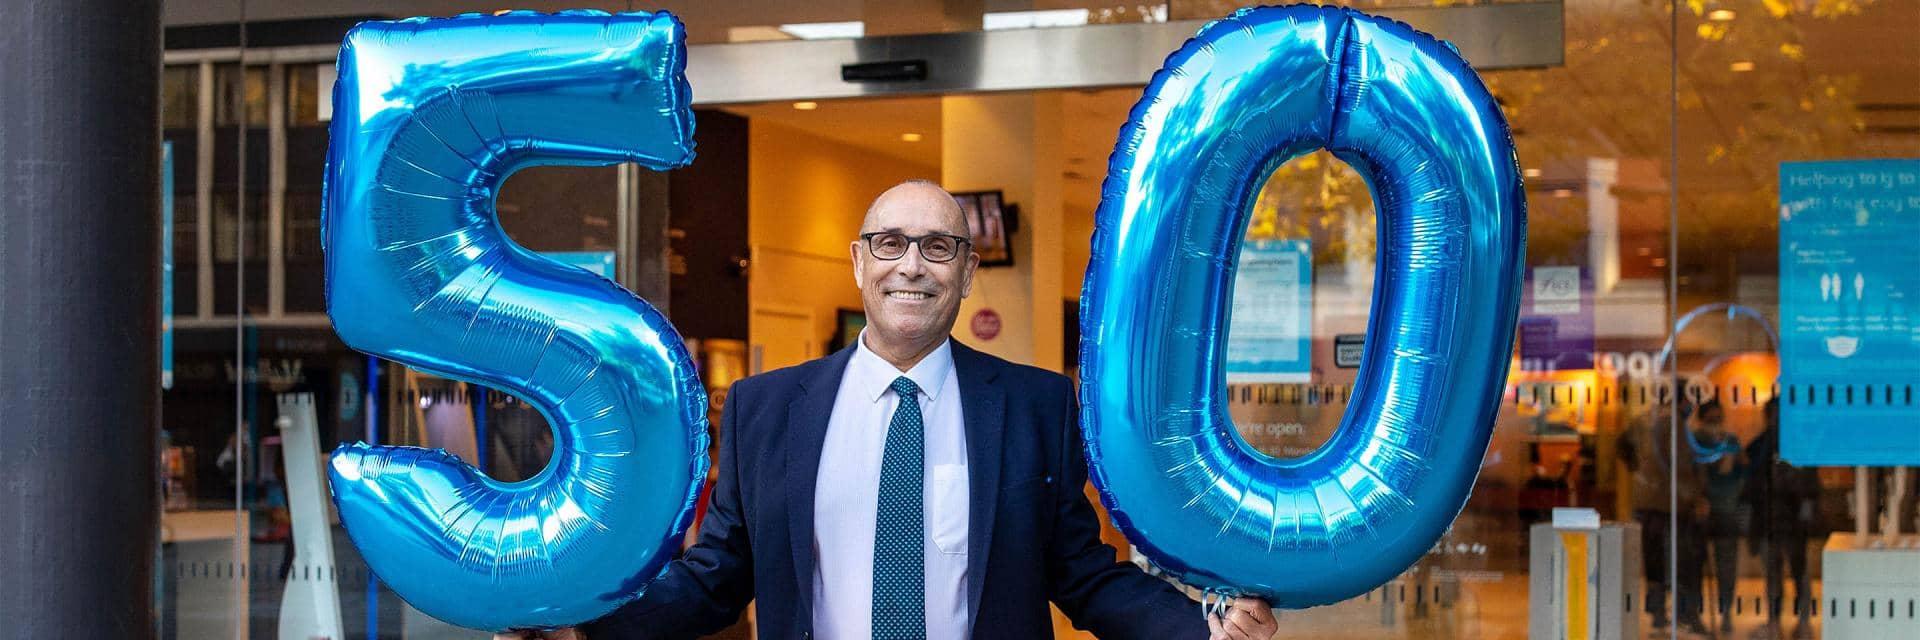 Colleague Jim Seabrook celebrates five decades at Barclays, at the Basildon branch.